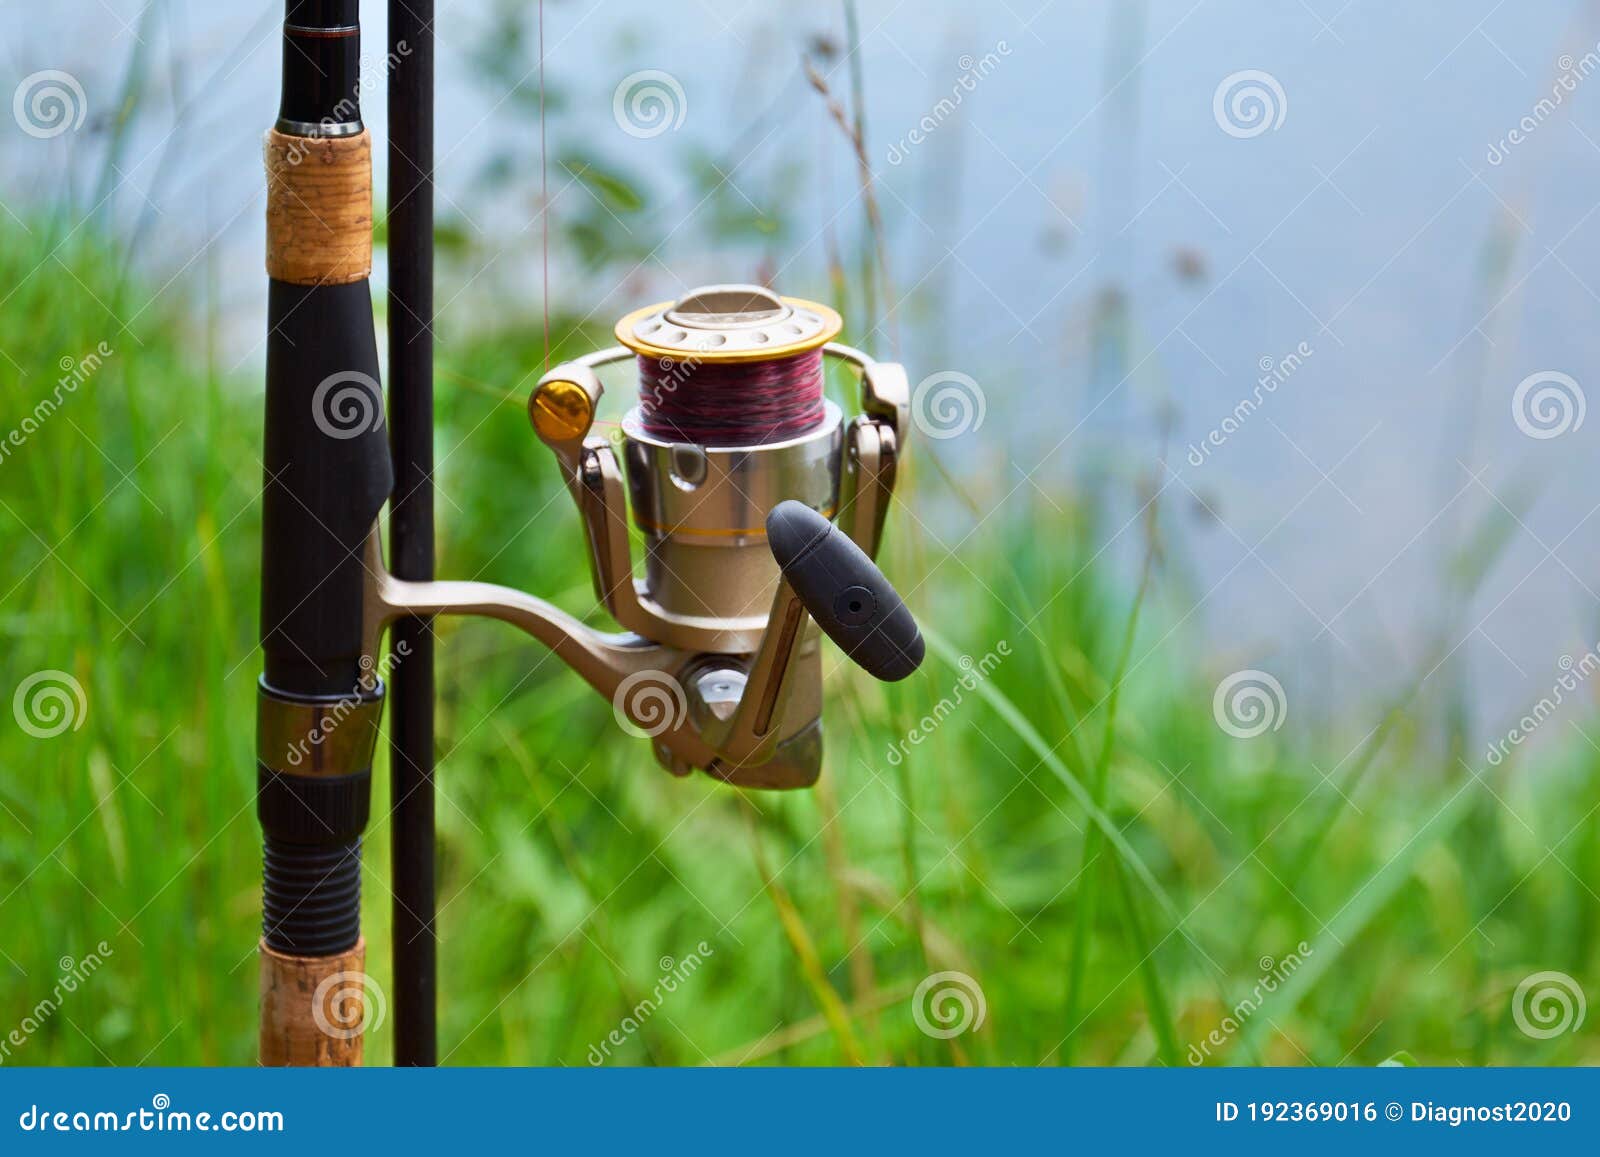 https://thumbs.dreamstime.com/z/feeder-fishing-rod-coil-stand-against-background-river-grass-english-style-concept-rural-getaway-192369016.jpg